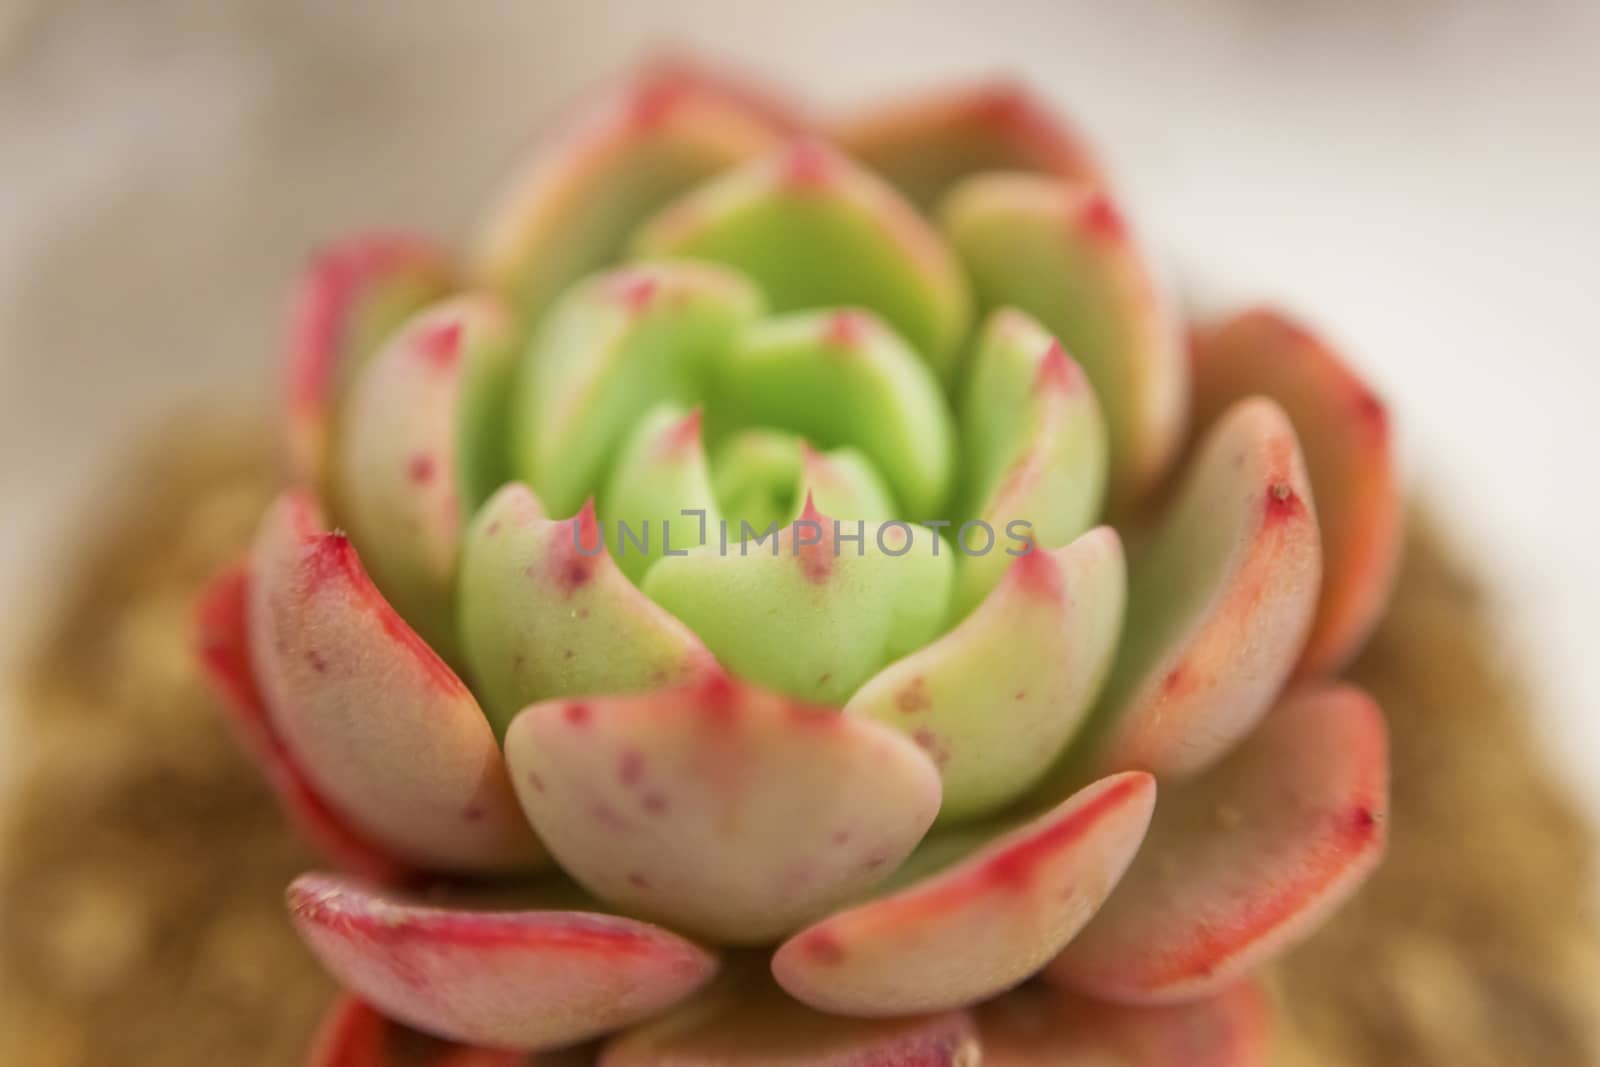 .Close-up of an Echeveria succulent with pink and green pointed leaves